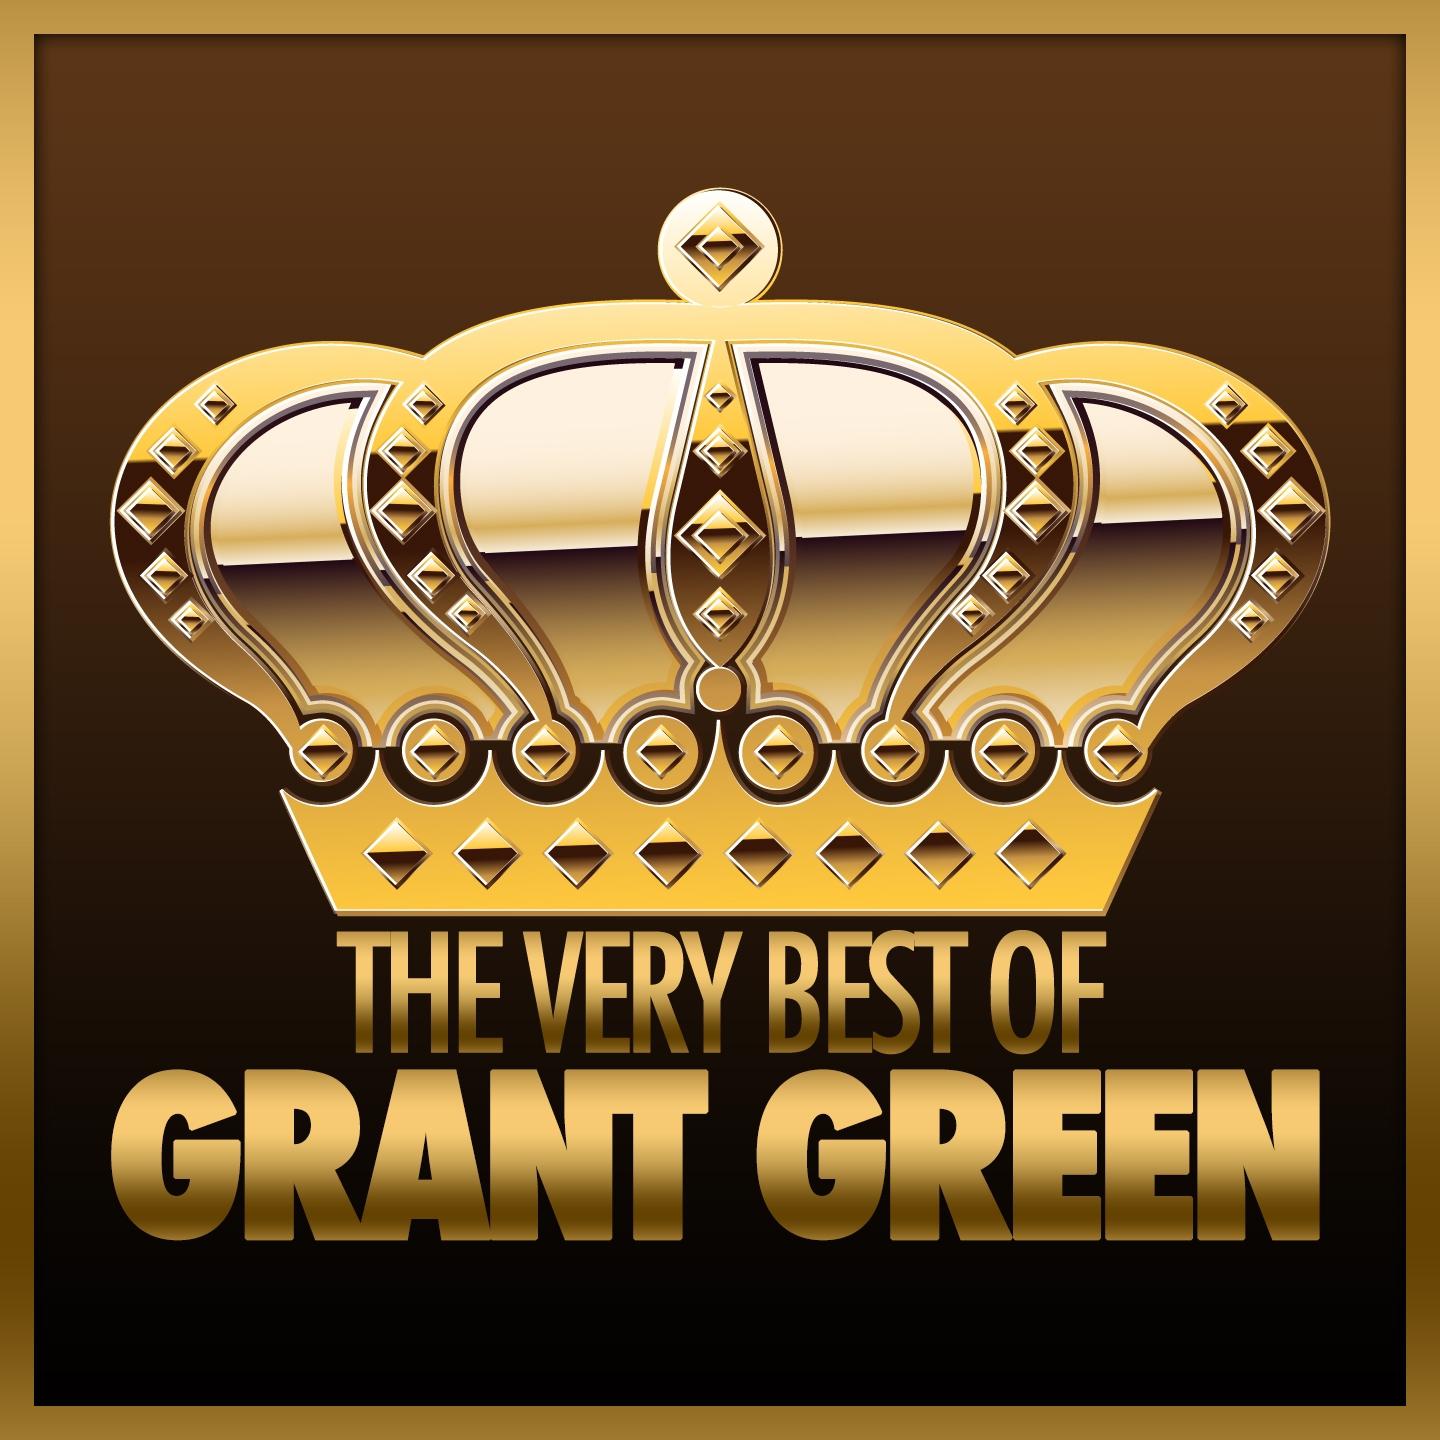 The Very Best of Grant Green